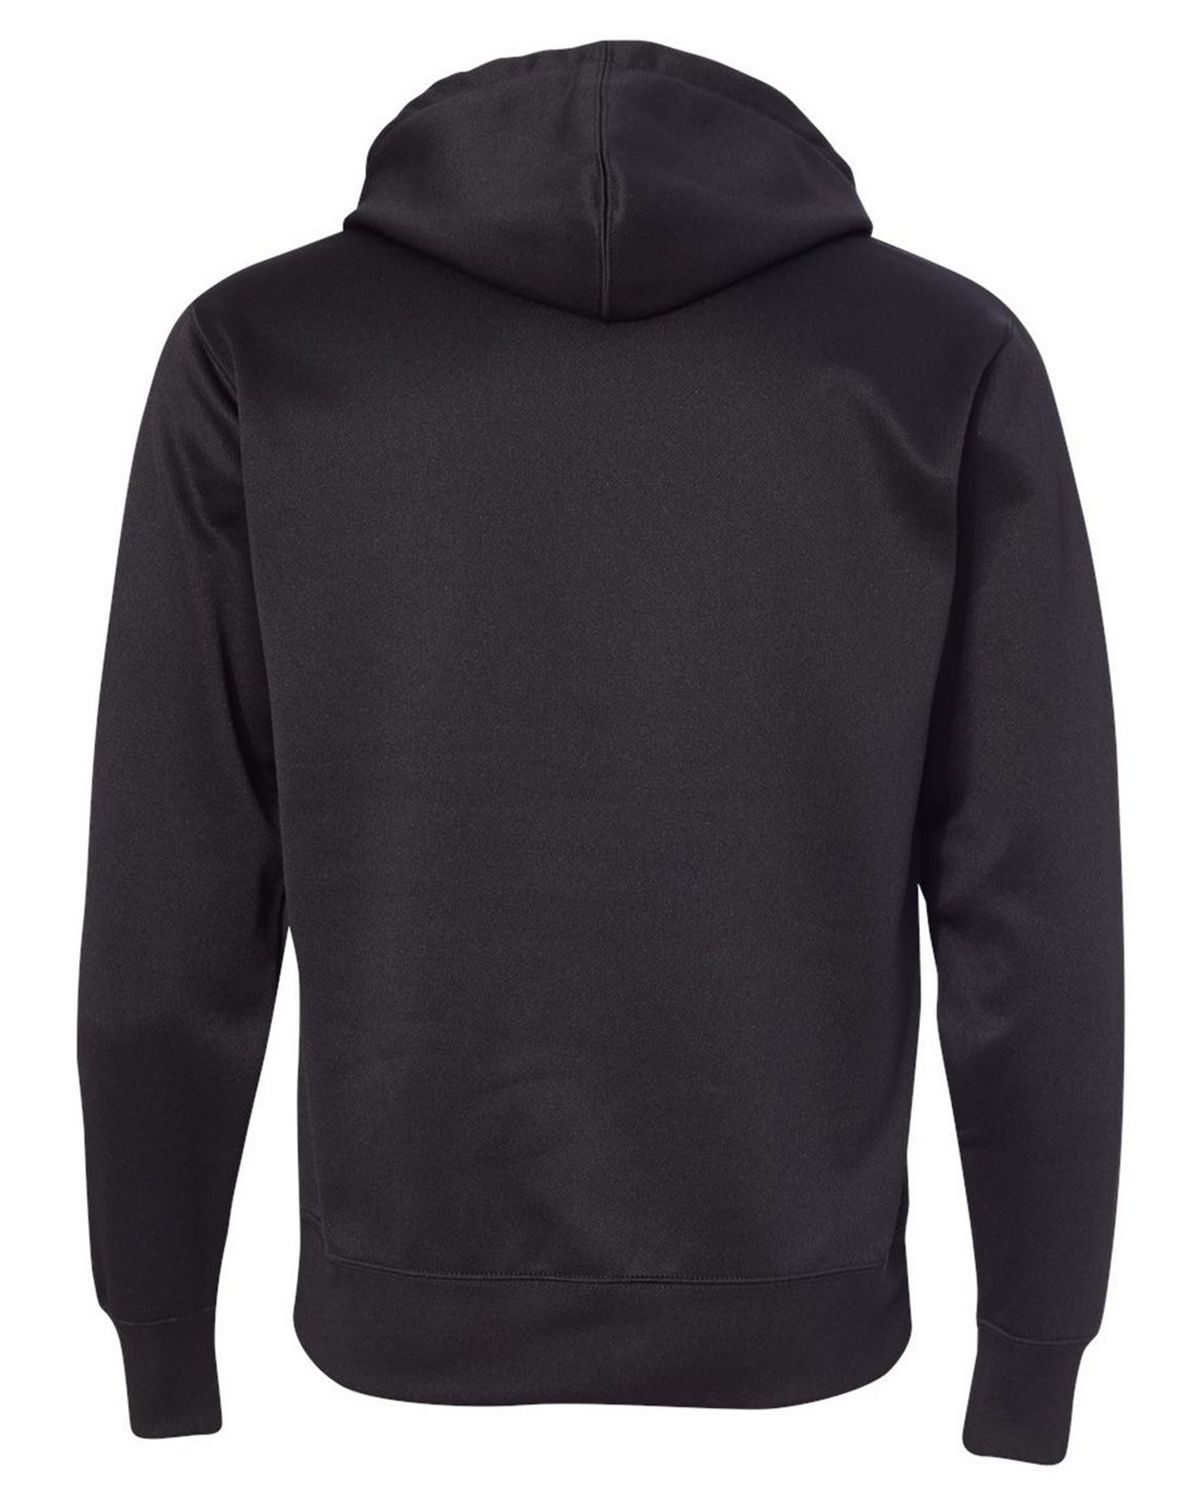 Independent Trading Co. EXP444PP Mens Poly-Tech Hooded Pullover Sweatshirt